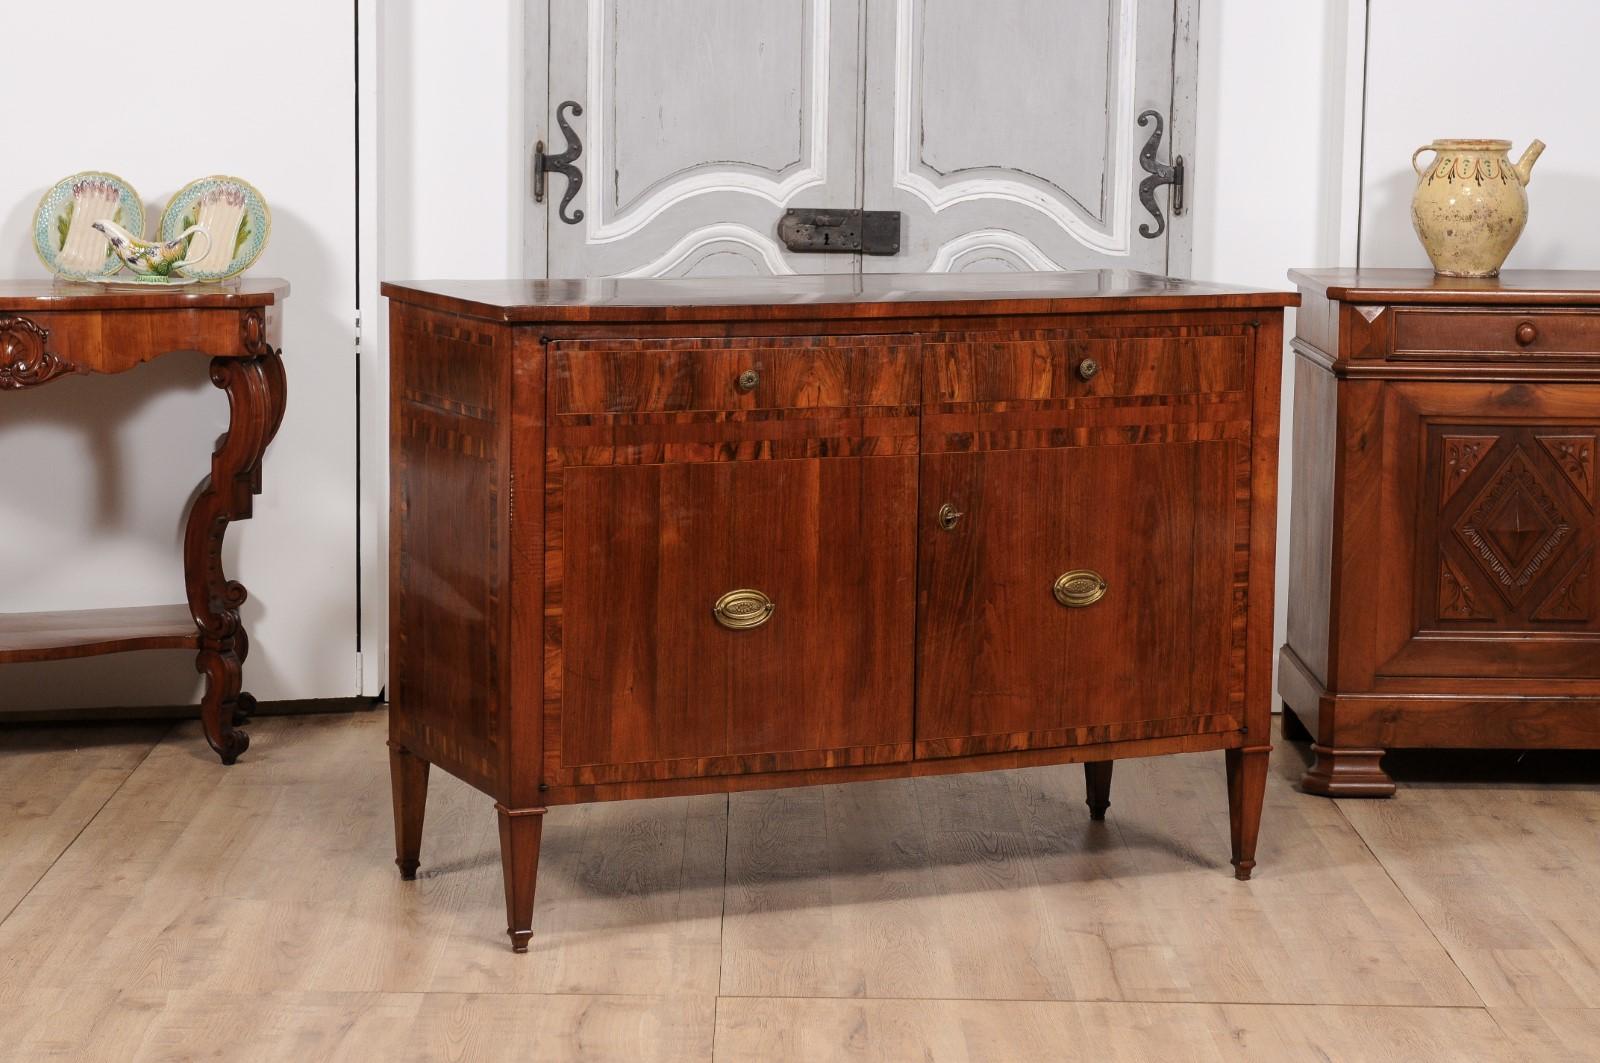 Inlay Italian 1780s Walnut and Mahogany Buffet with Cross Banding and Tapered Legs For Sale